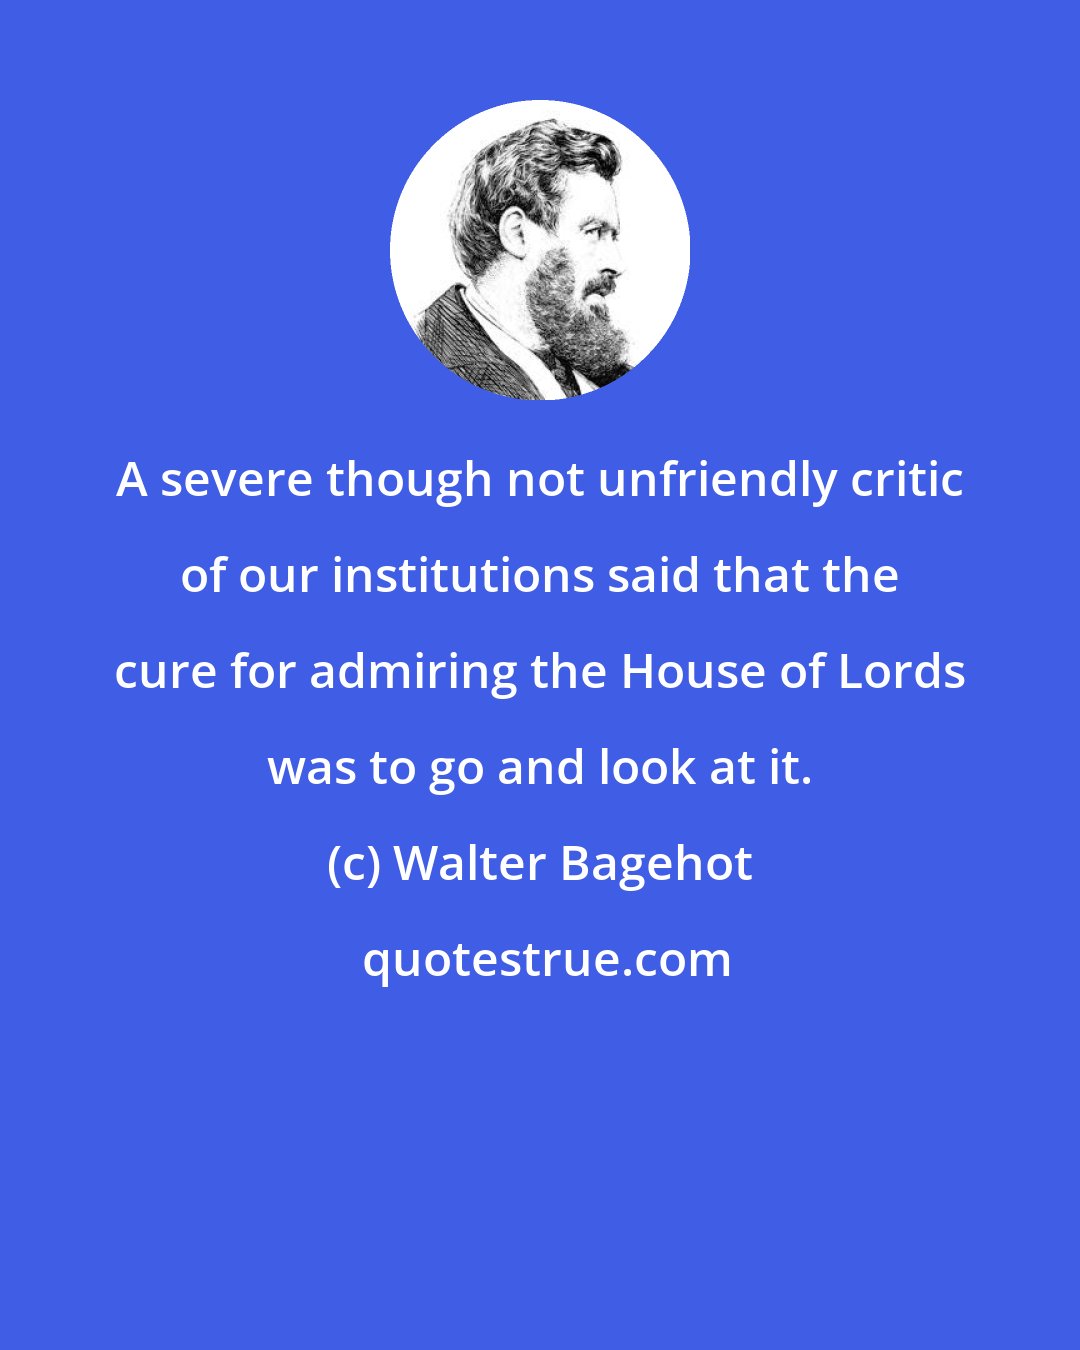 Walter Bagehot: A severe though not unfriendly critic of our institutions said that the cure for admiring the House of Lords was to go and look at it.